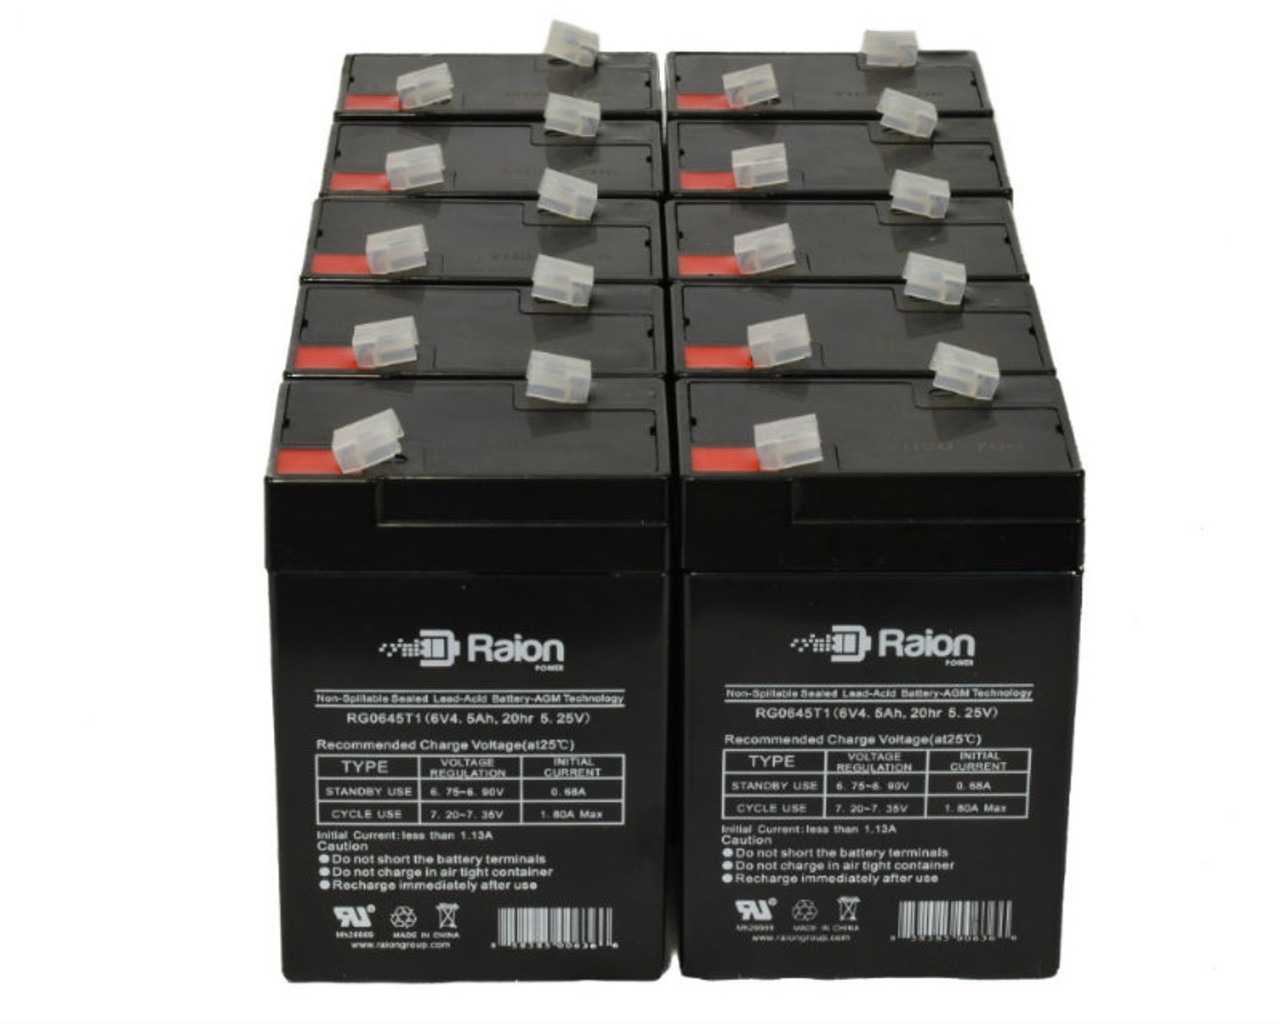 Raion Power 6V 4.5Ah Replacement Emergency Light Battery for Trio TL9300862 - 10 Pack